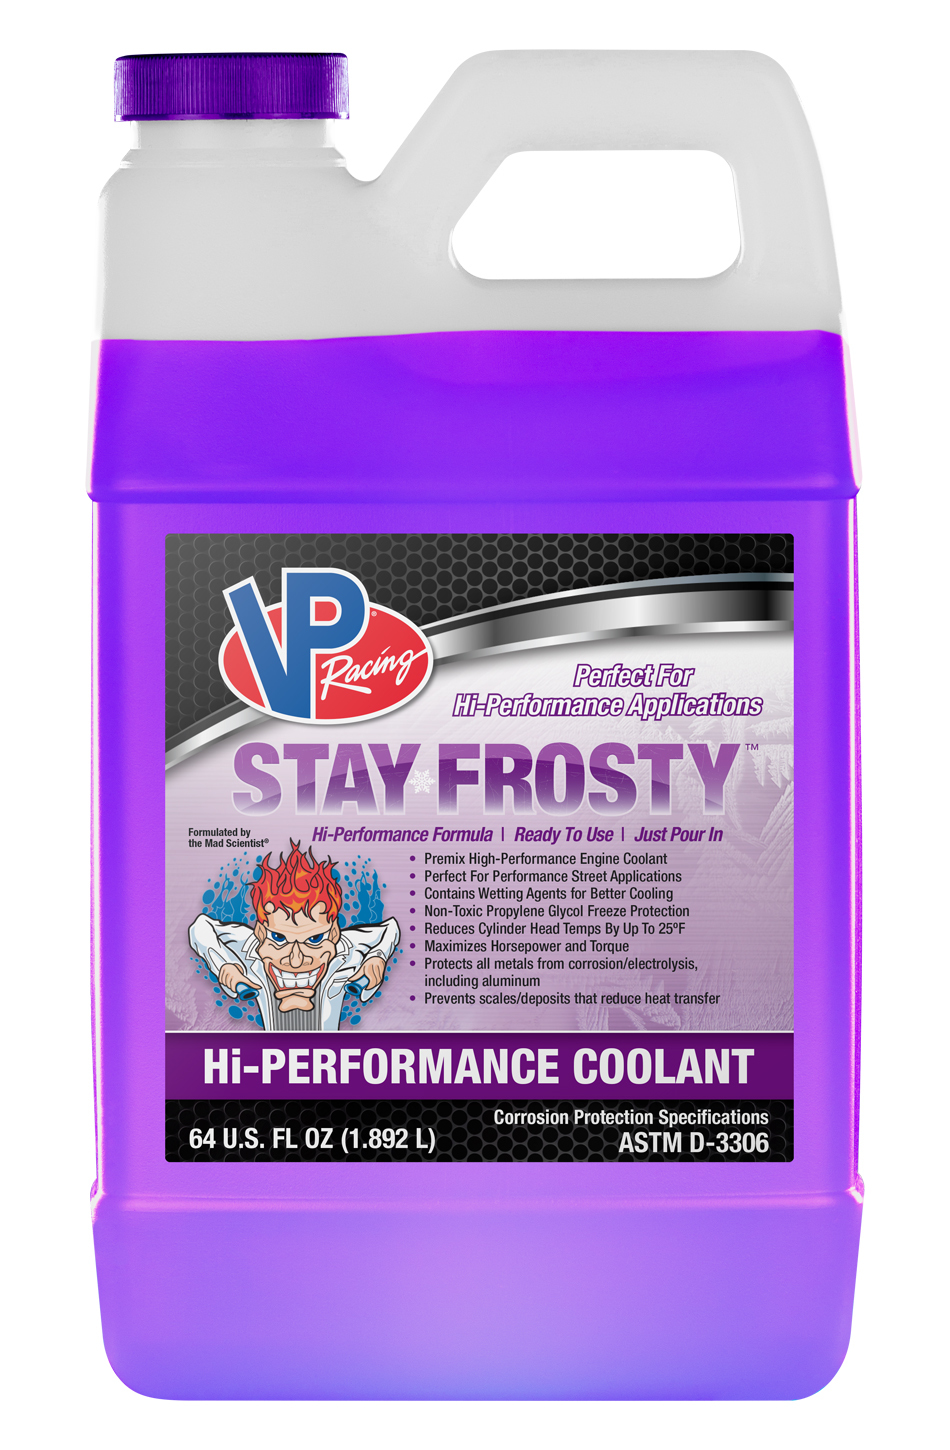 VP RACING Coolant Hi-Perf Stay Frosty 64oz